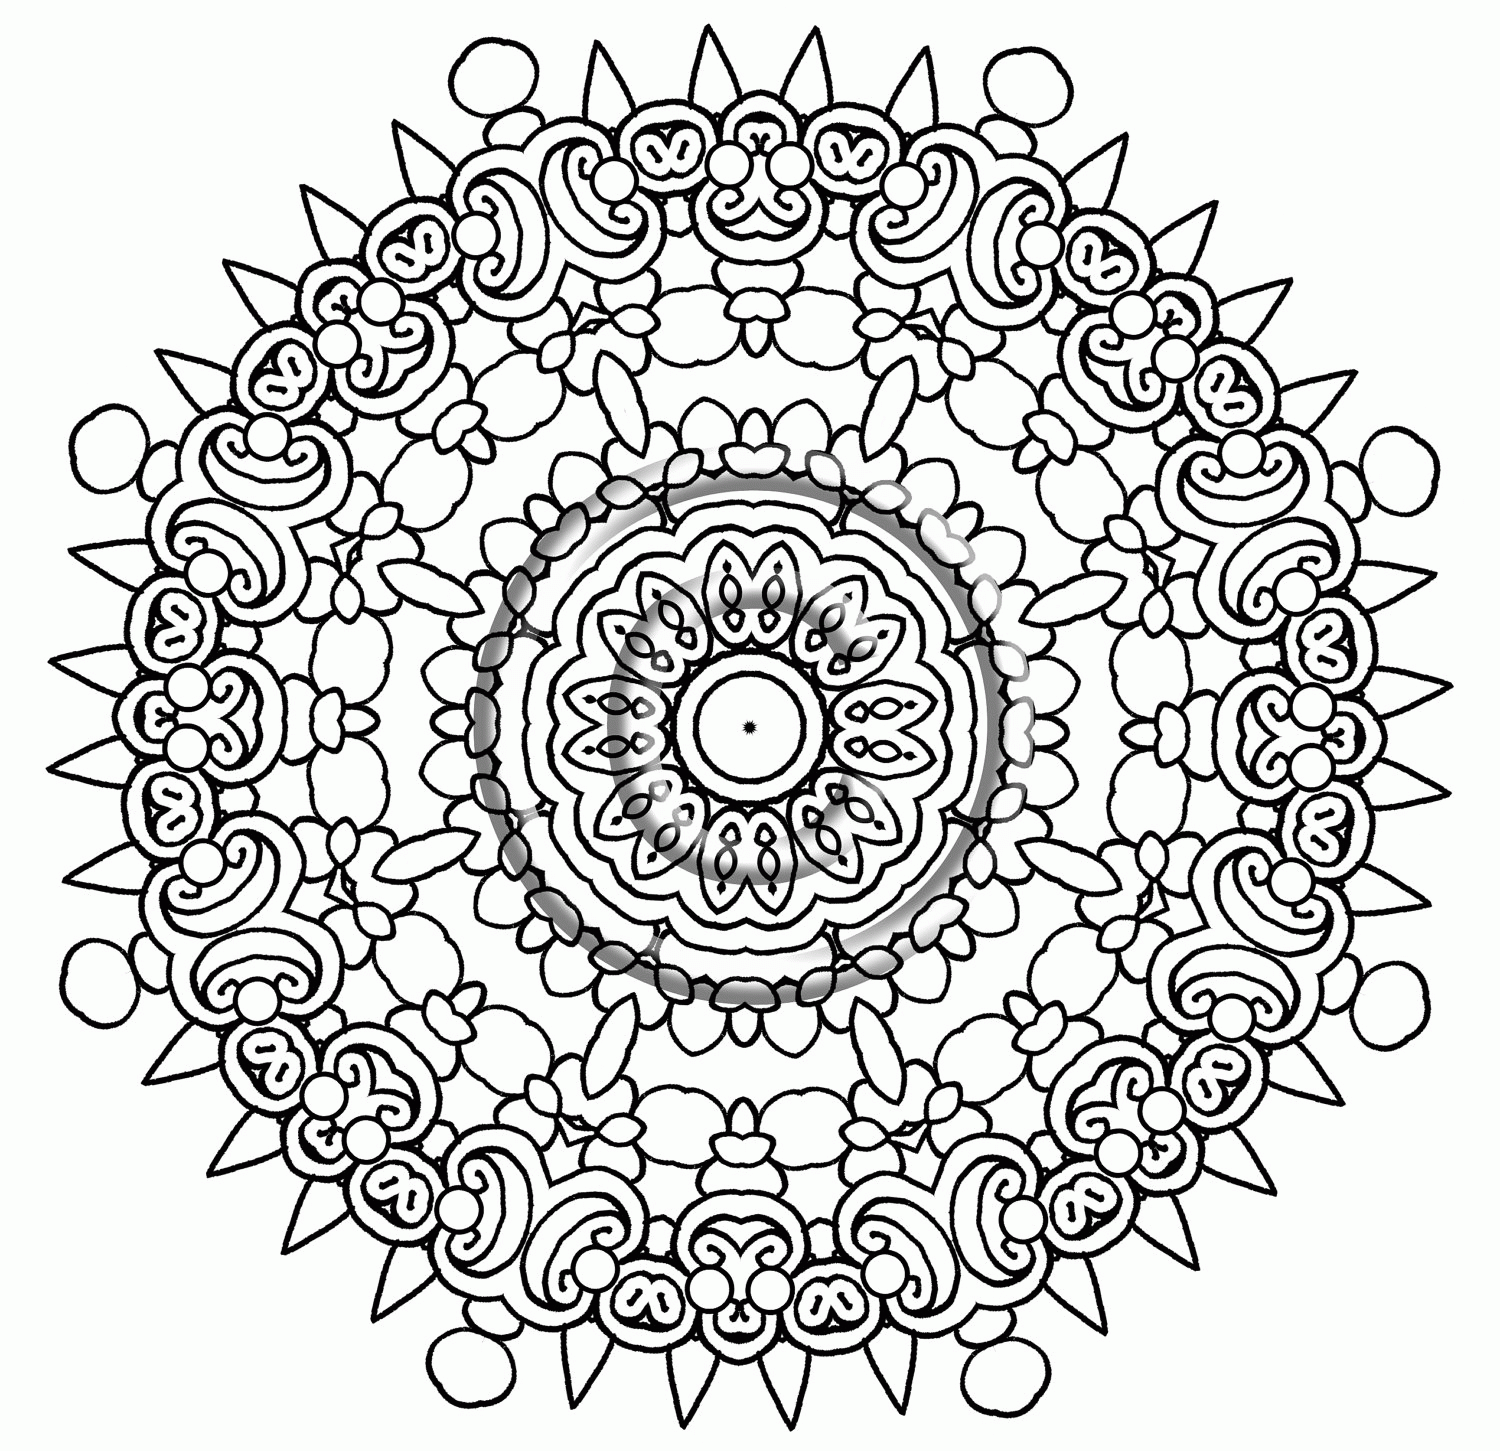 intricate mandala coloring pages | High Quality Coloring Pages